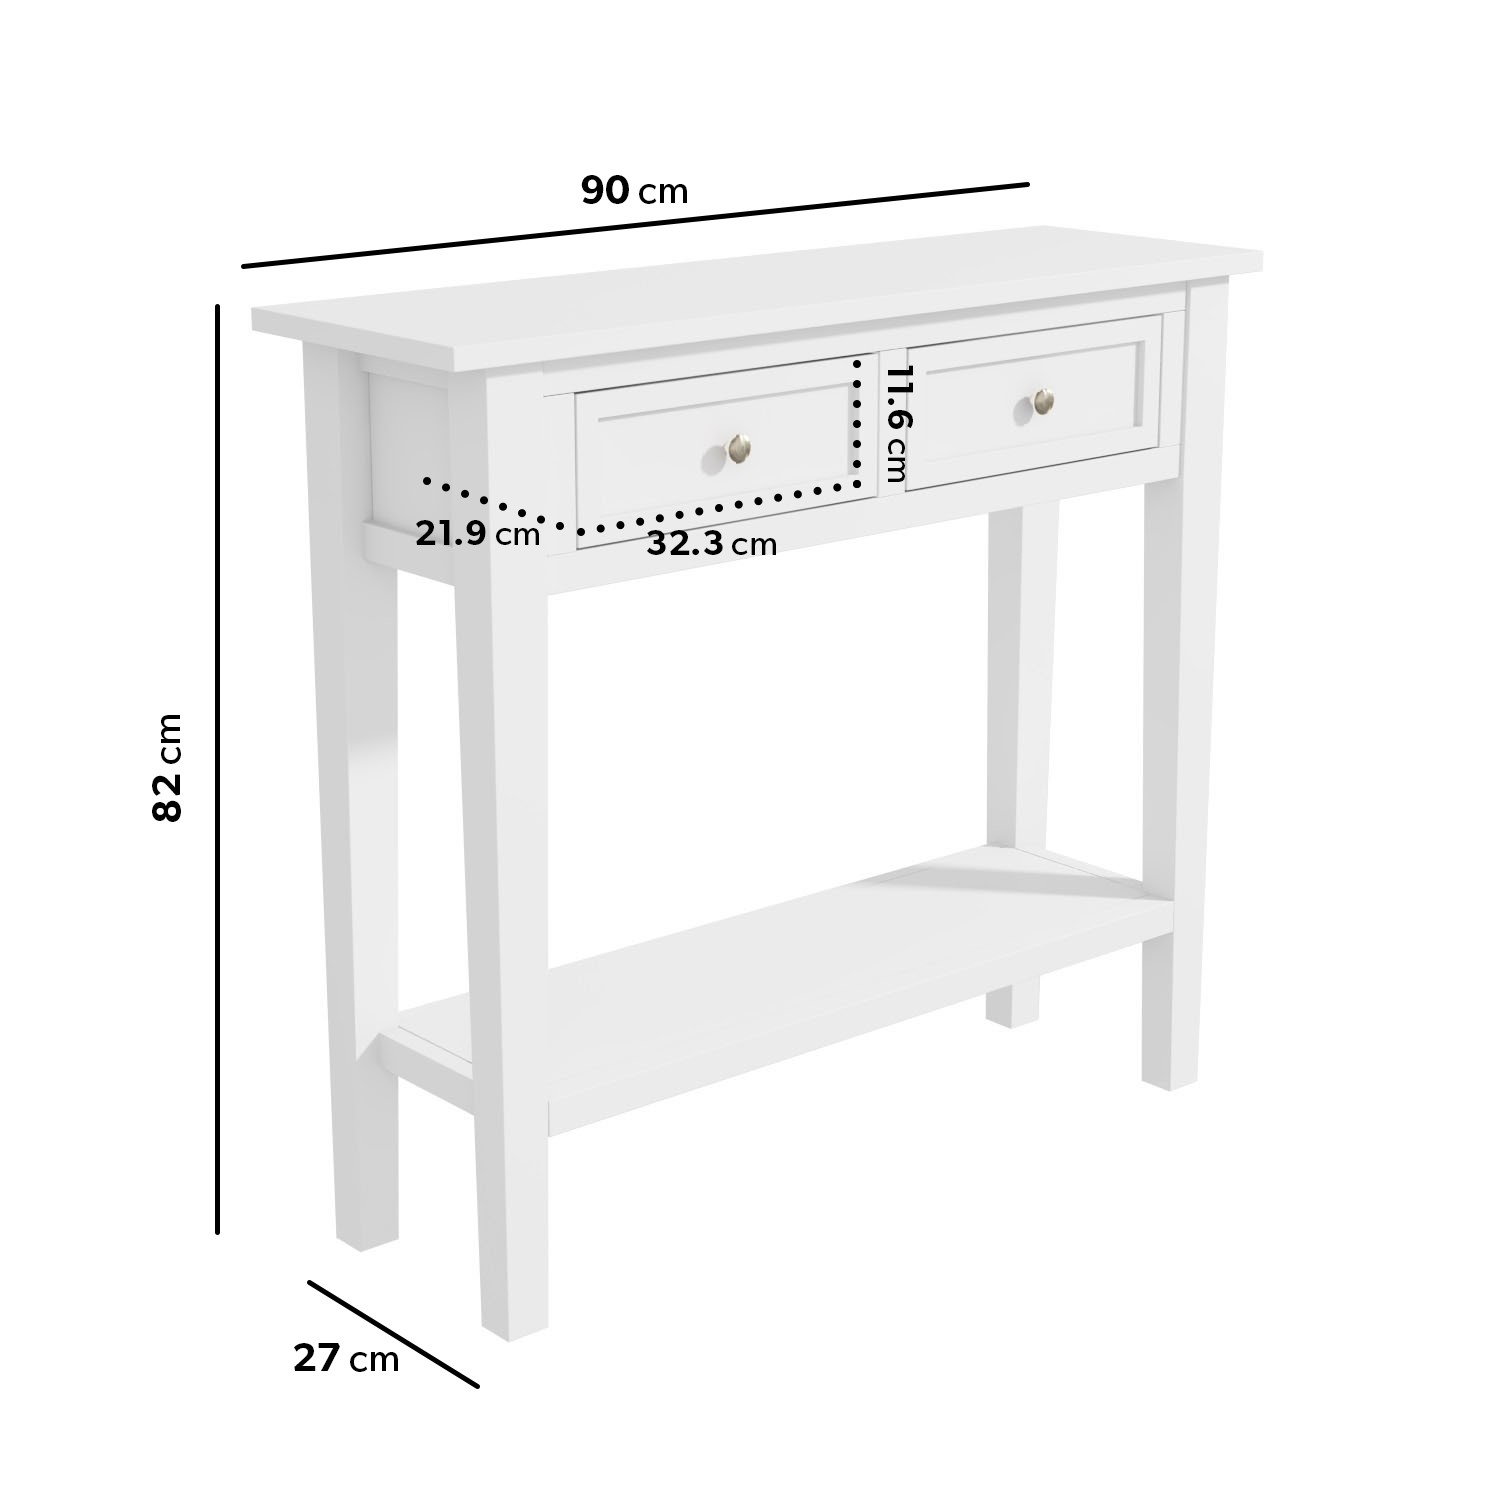 Read more about Narrow console table with drawers in white elms